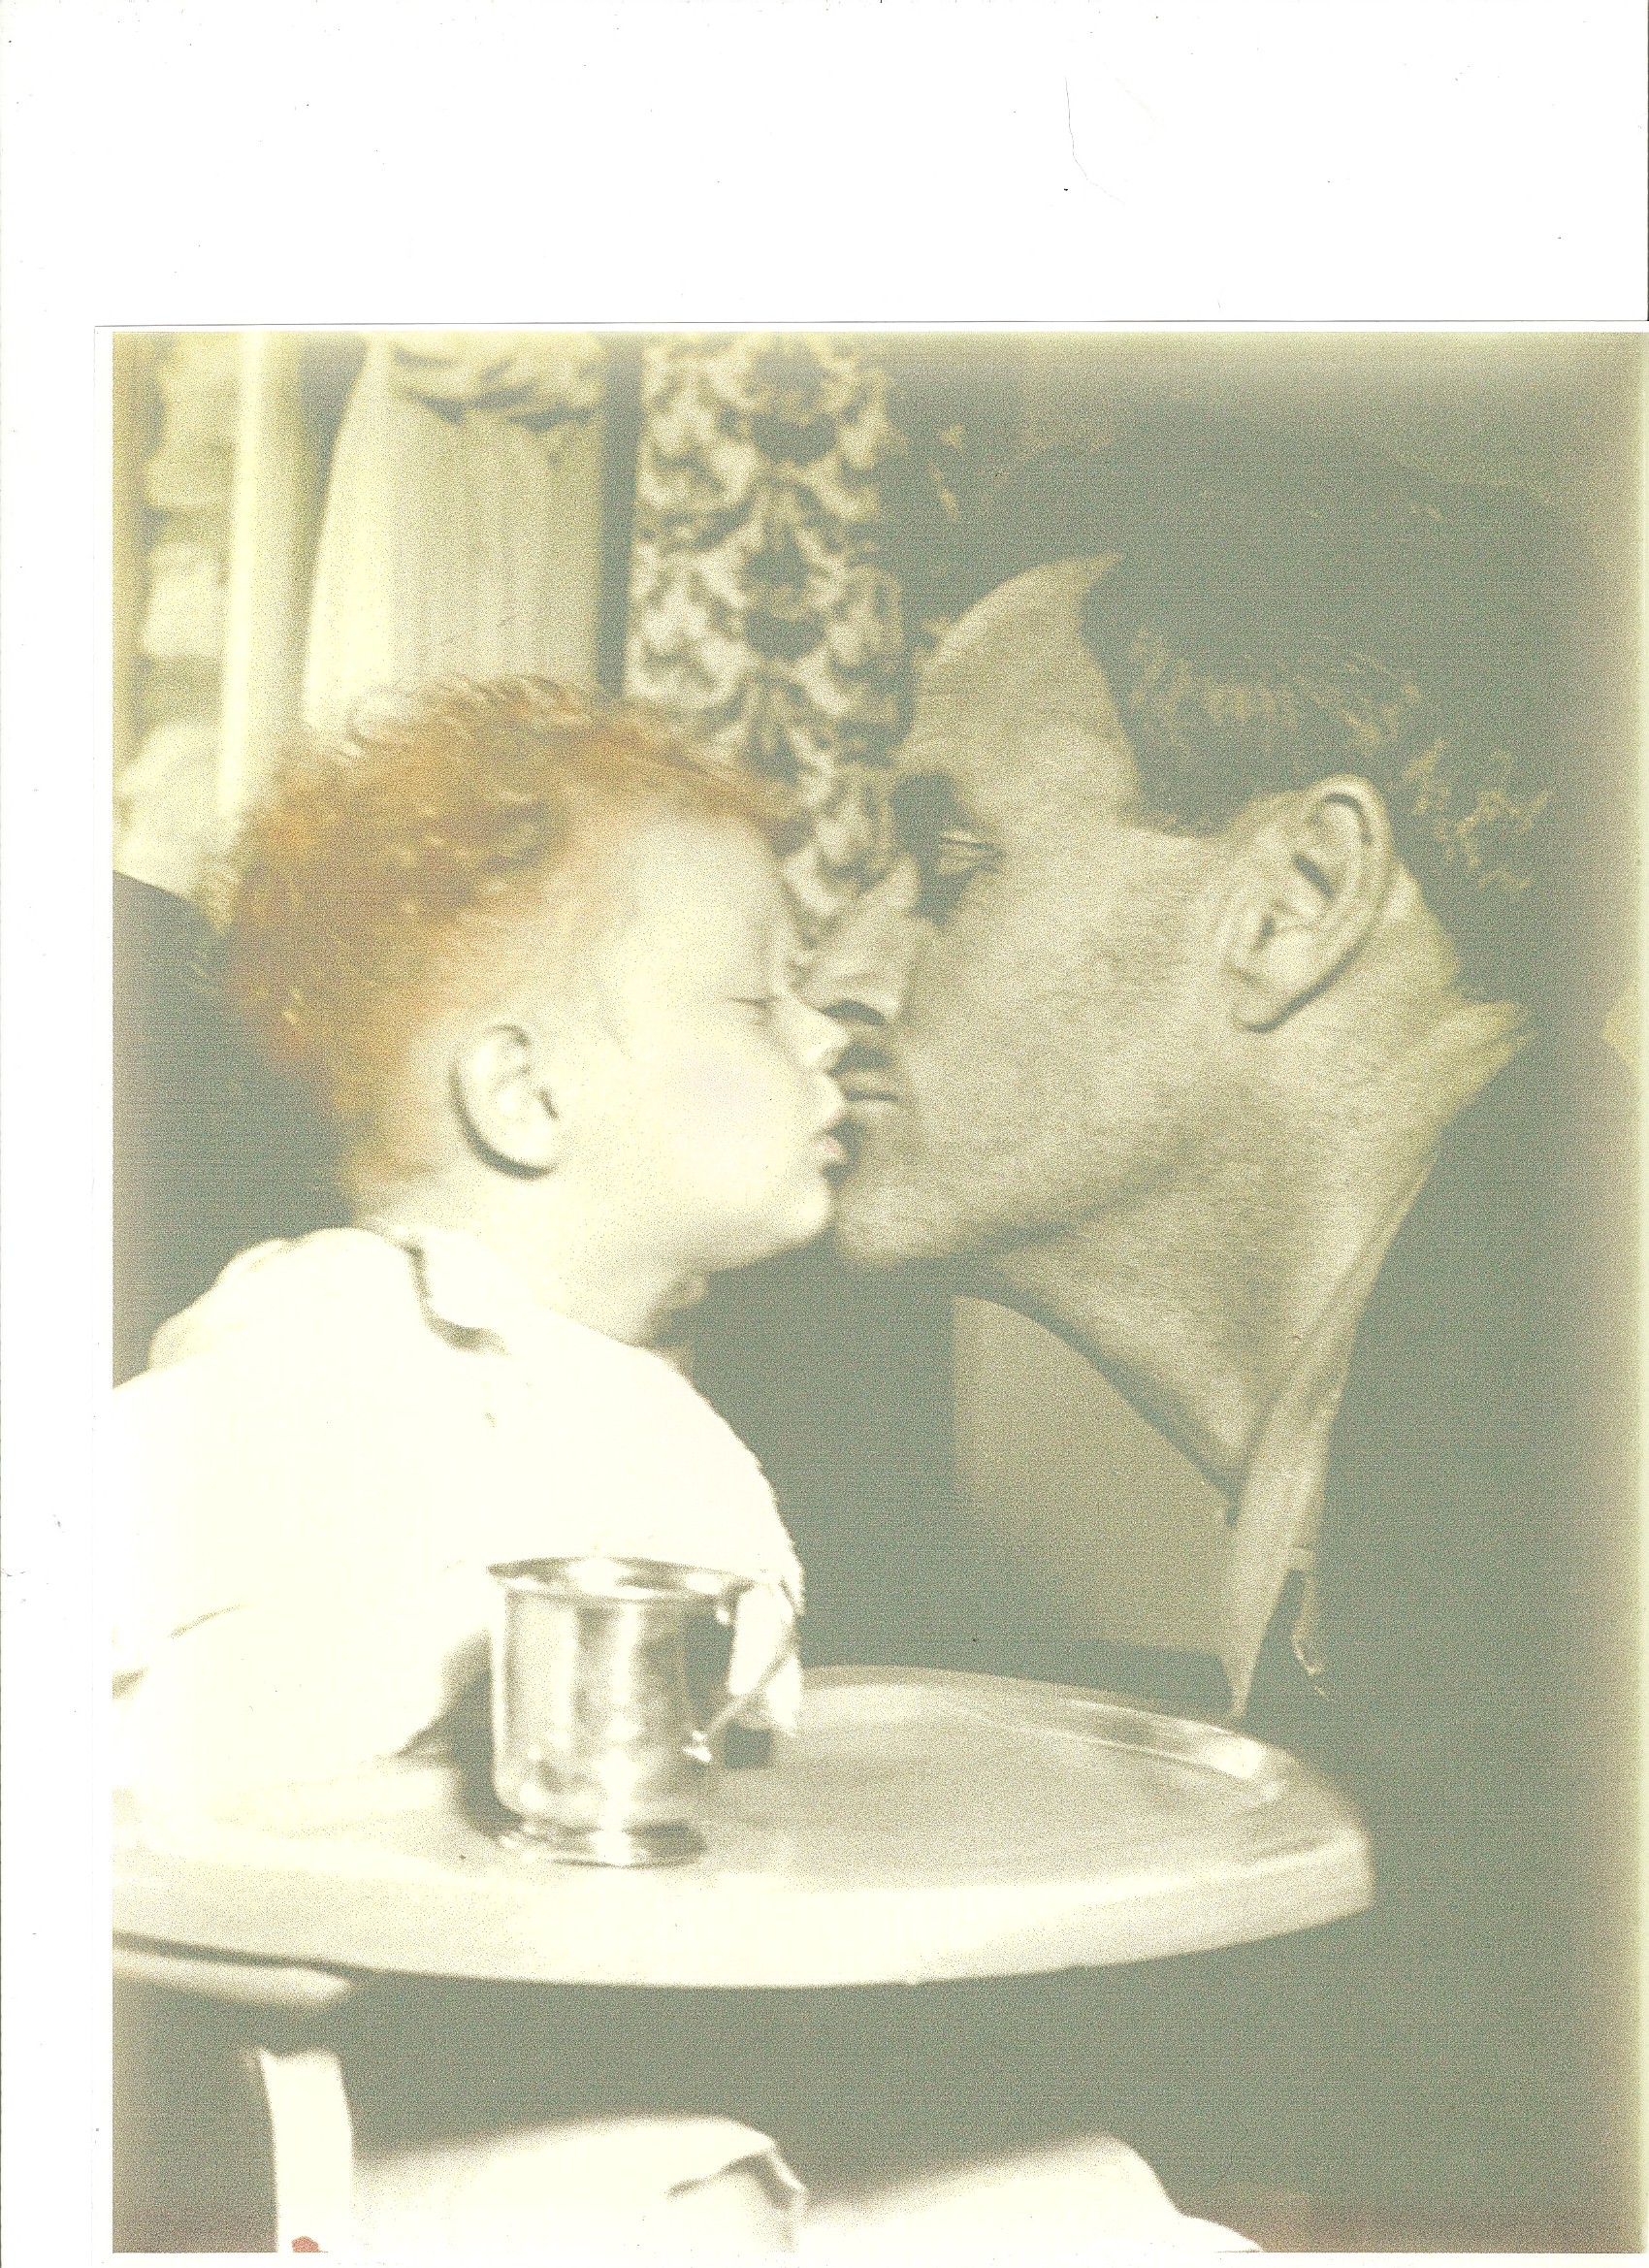 my beautiful father director William A wellman.kissing his daughter Cissy